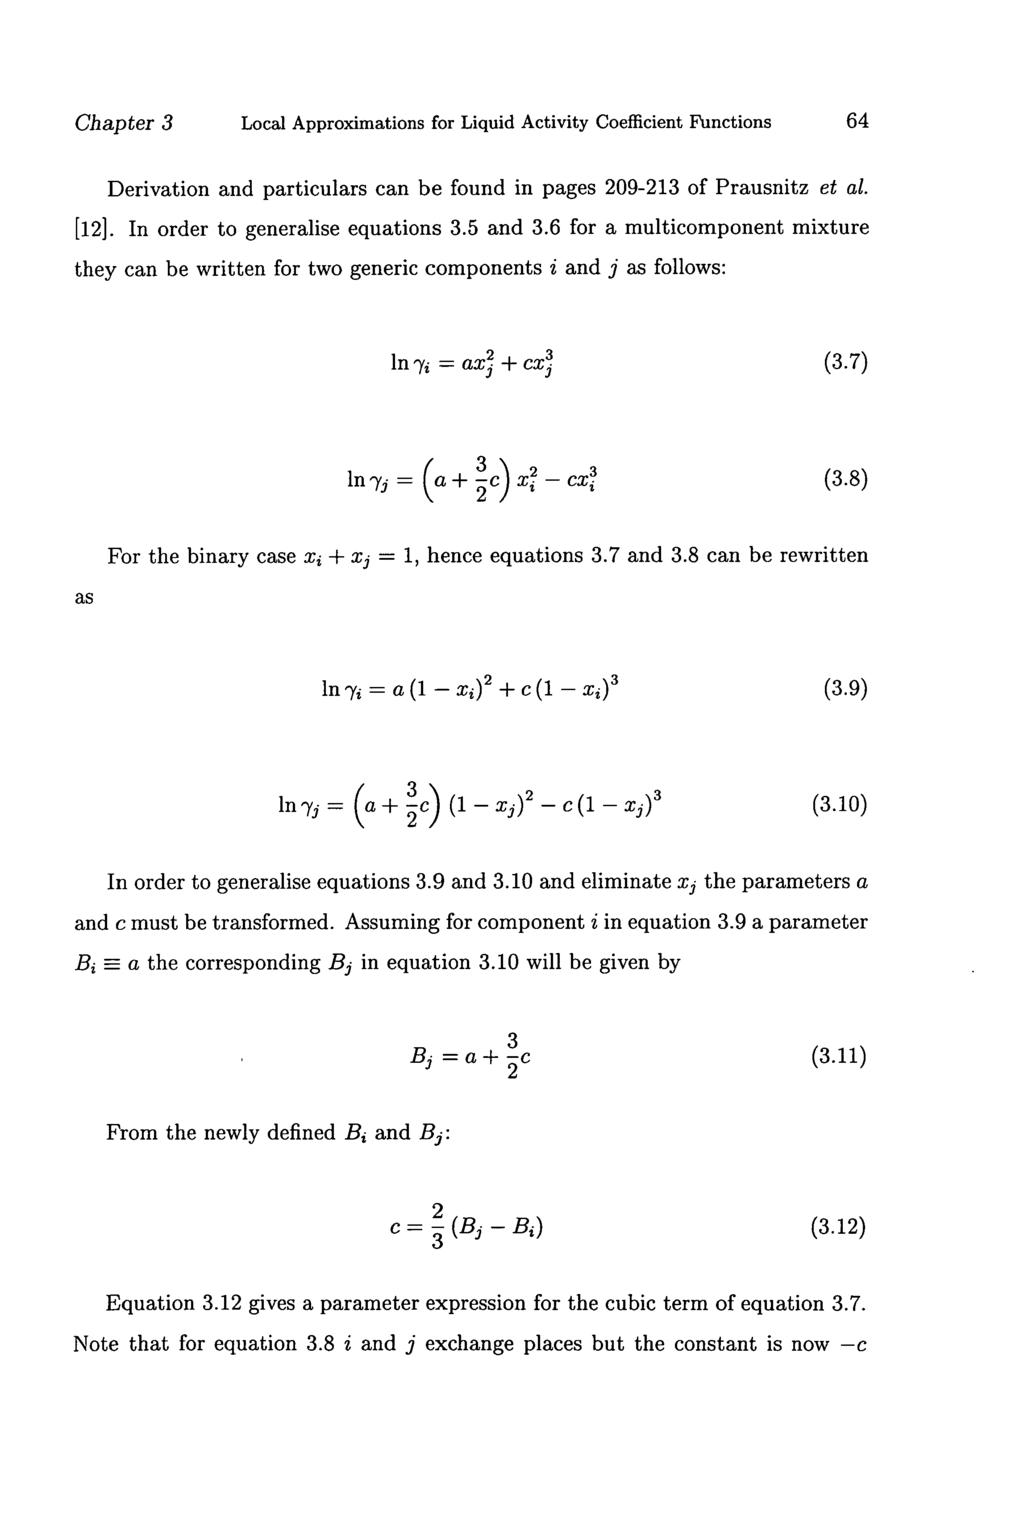 Chapter 3 Local Approximations for Liquid Activity Coefficient Functions 64 Derivation and particulars can be found in pages 209-213 of Prausnitz et al. [12]. In order to generalise equations 3.